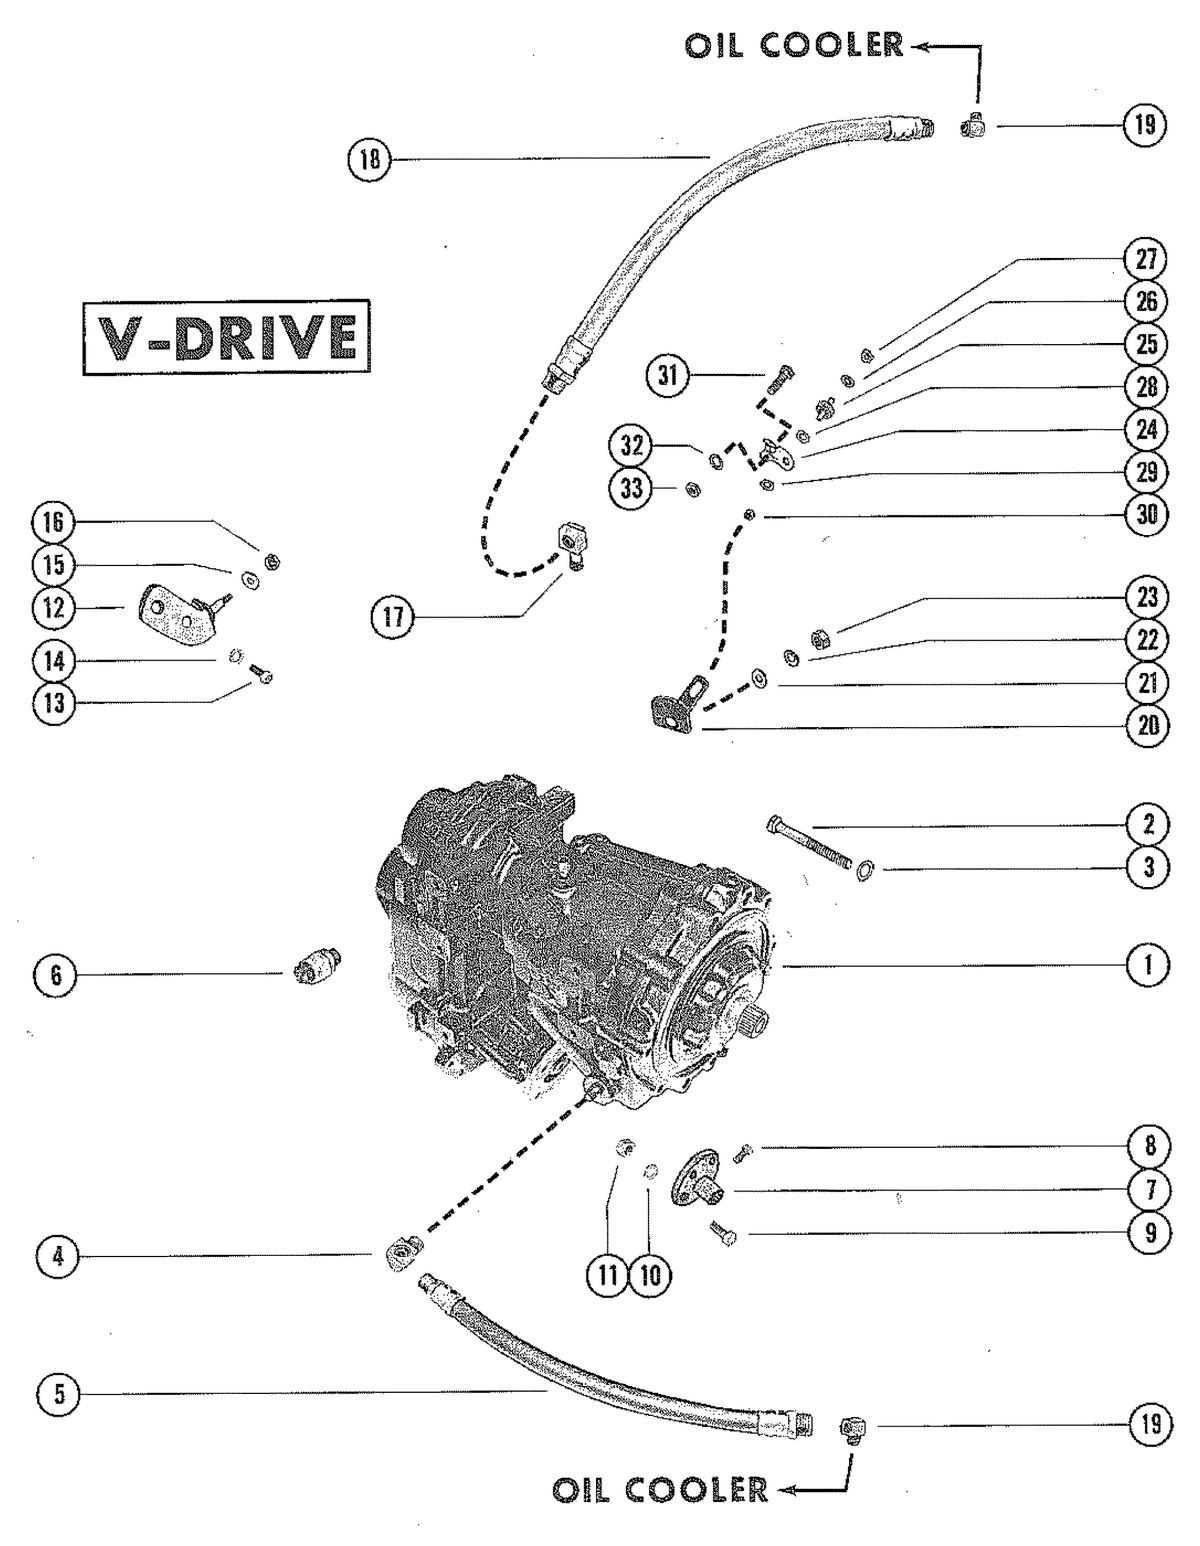 MERCRUISER 225 ENGINE TRANSMISSION AND RELATED PARTS (V-DRIVE)